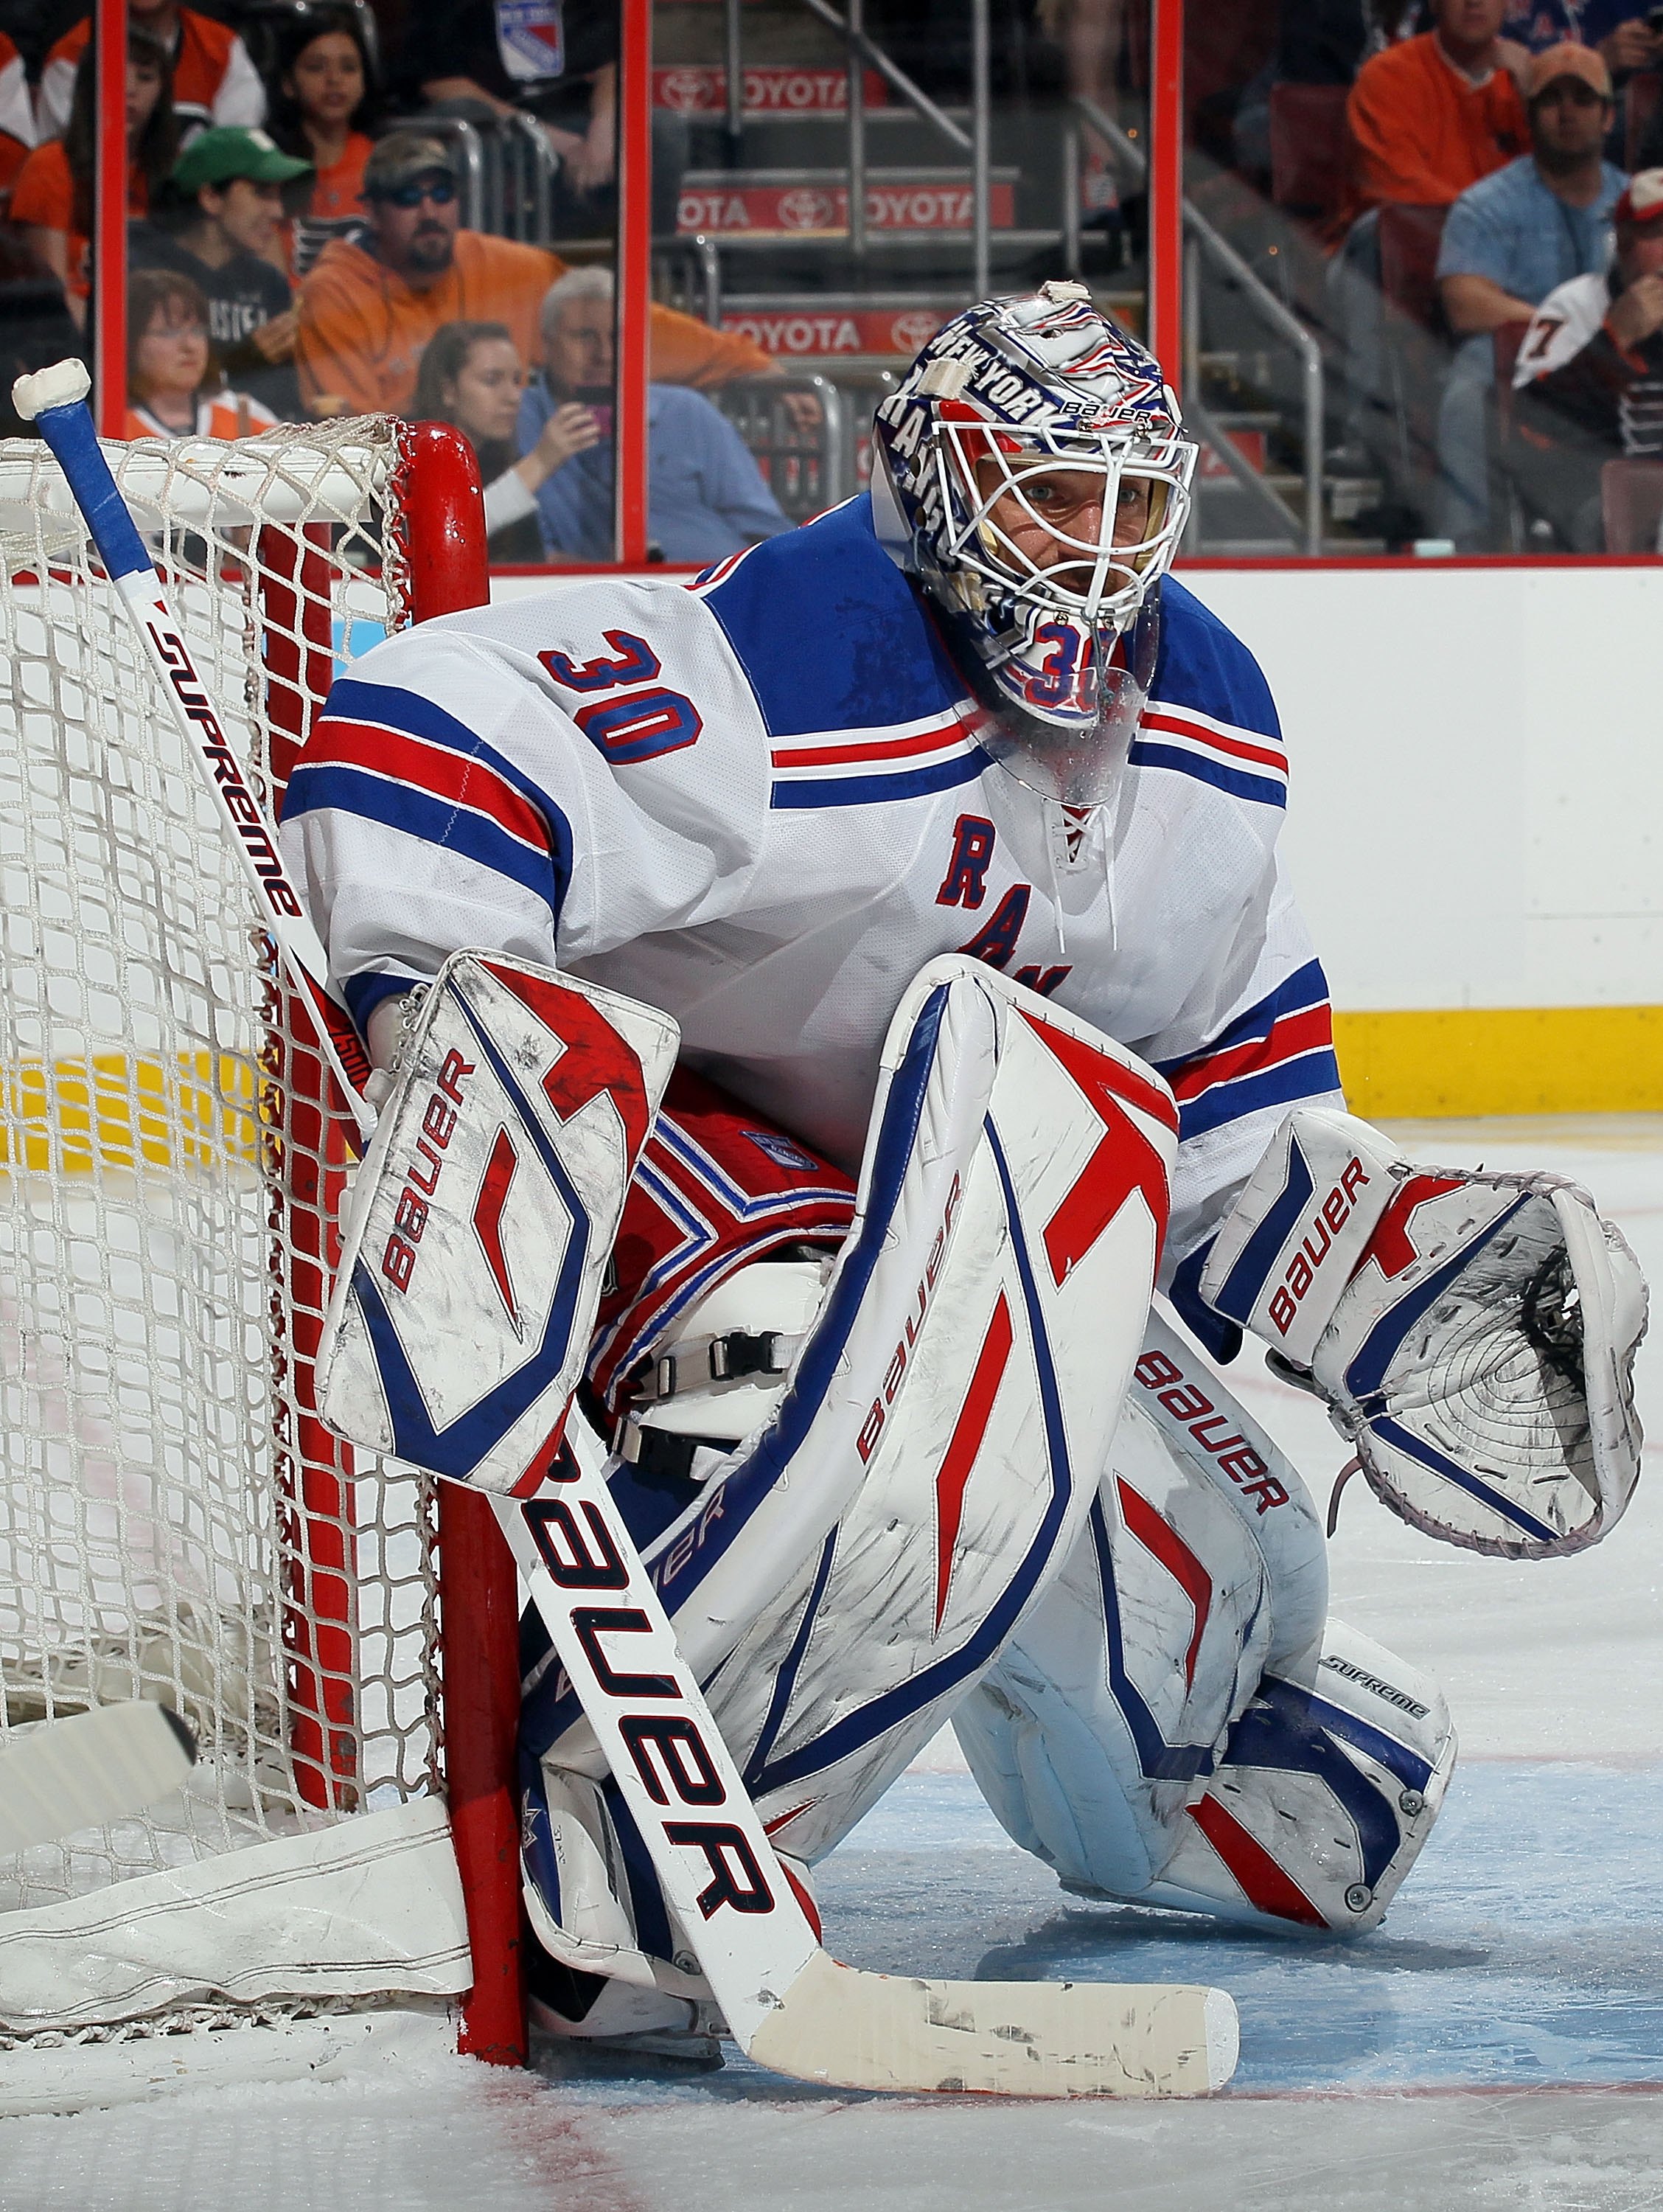 On March 6 in New York Rangers history: Mike Gartner becomes a Ranger